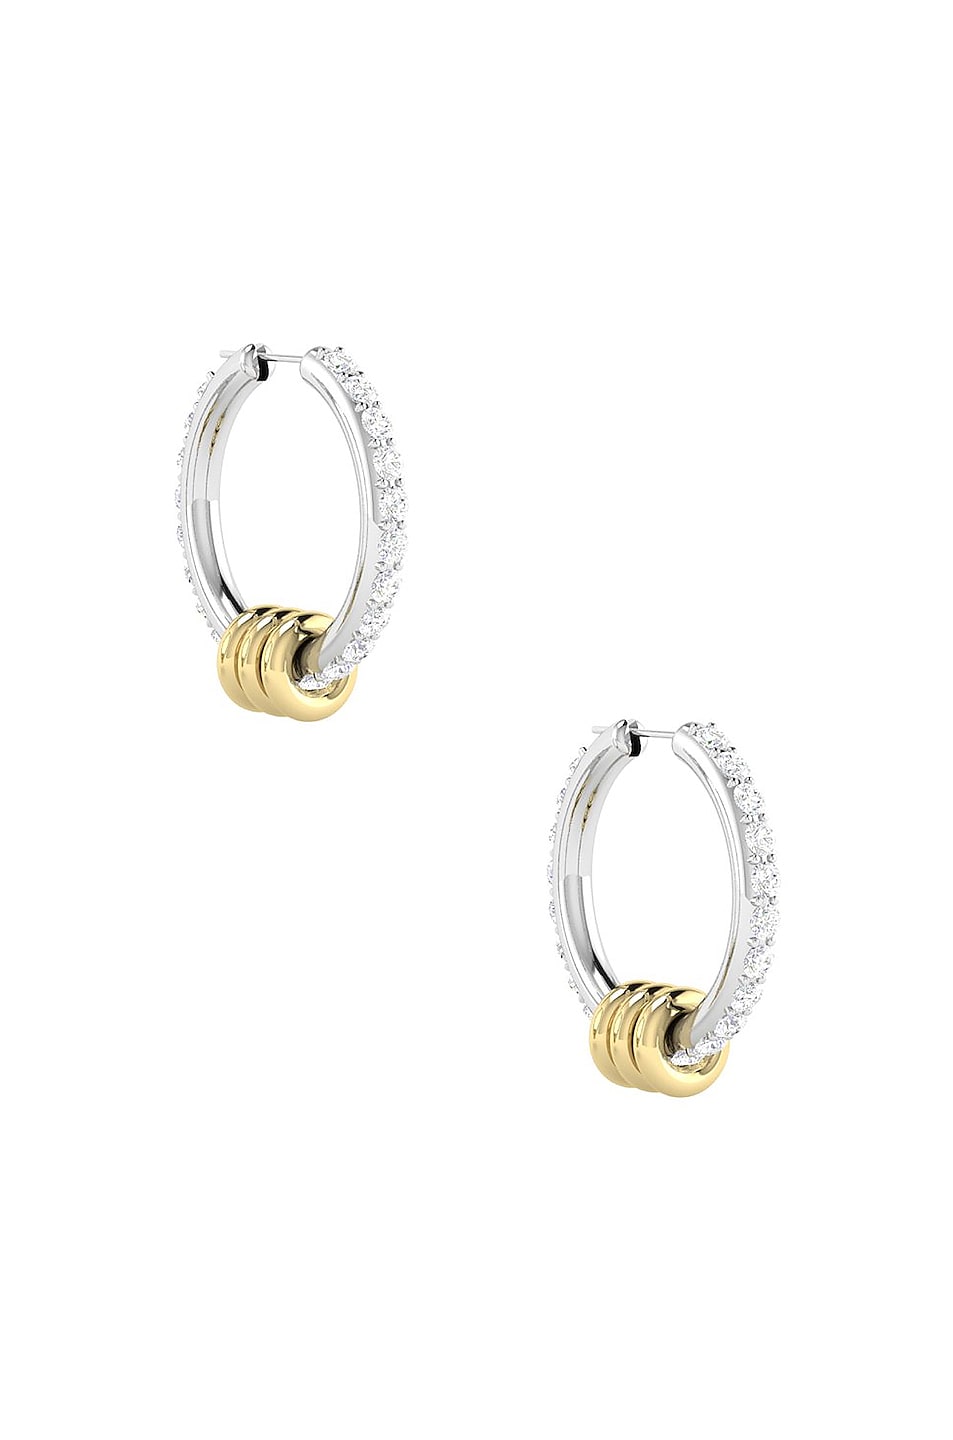 Image 1 of Spinelli Kilcollin Ara Pave Earrings in Sterling Silver, 18K Yellow Gold, & White Diamonds